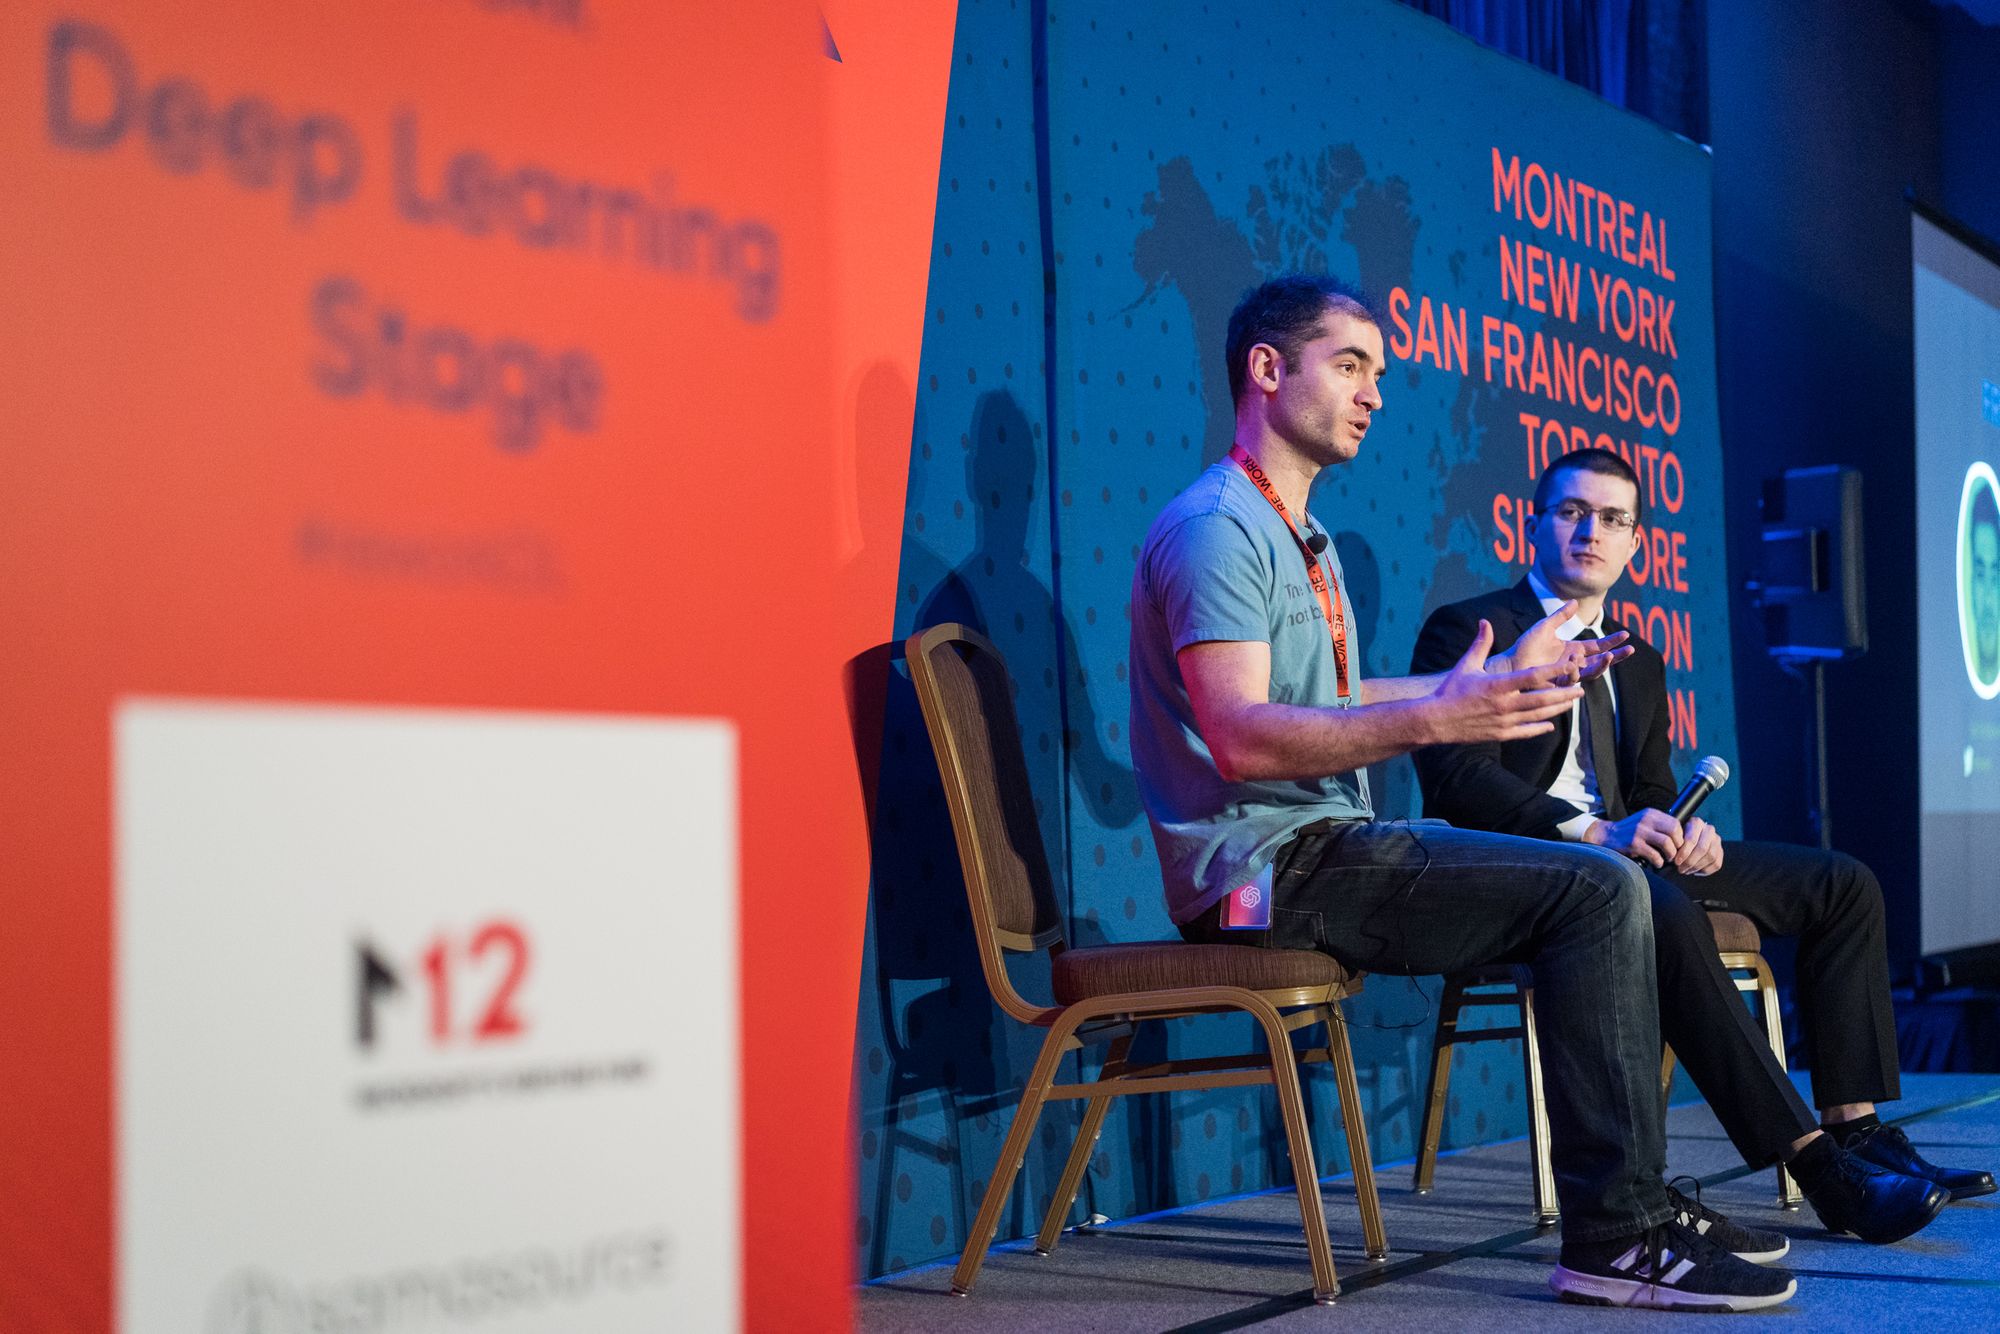 Lex Fridman on X: I had a great time chatting with Ilya Sutskever  (@ilyasut) on stage at ReWork (@reworkdl) today after giving a talk there.  We also recorded a podcast. Ilya is